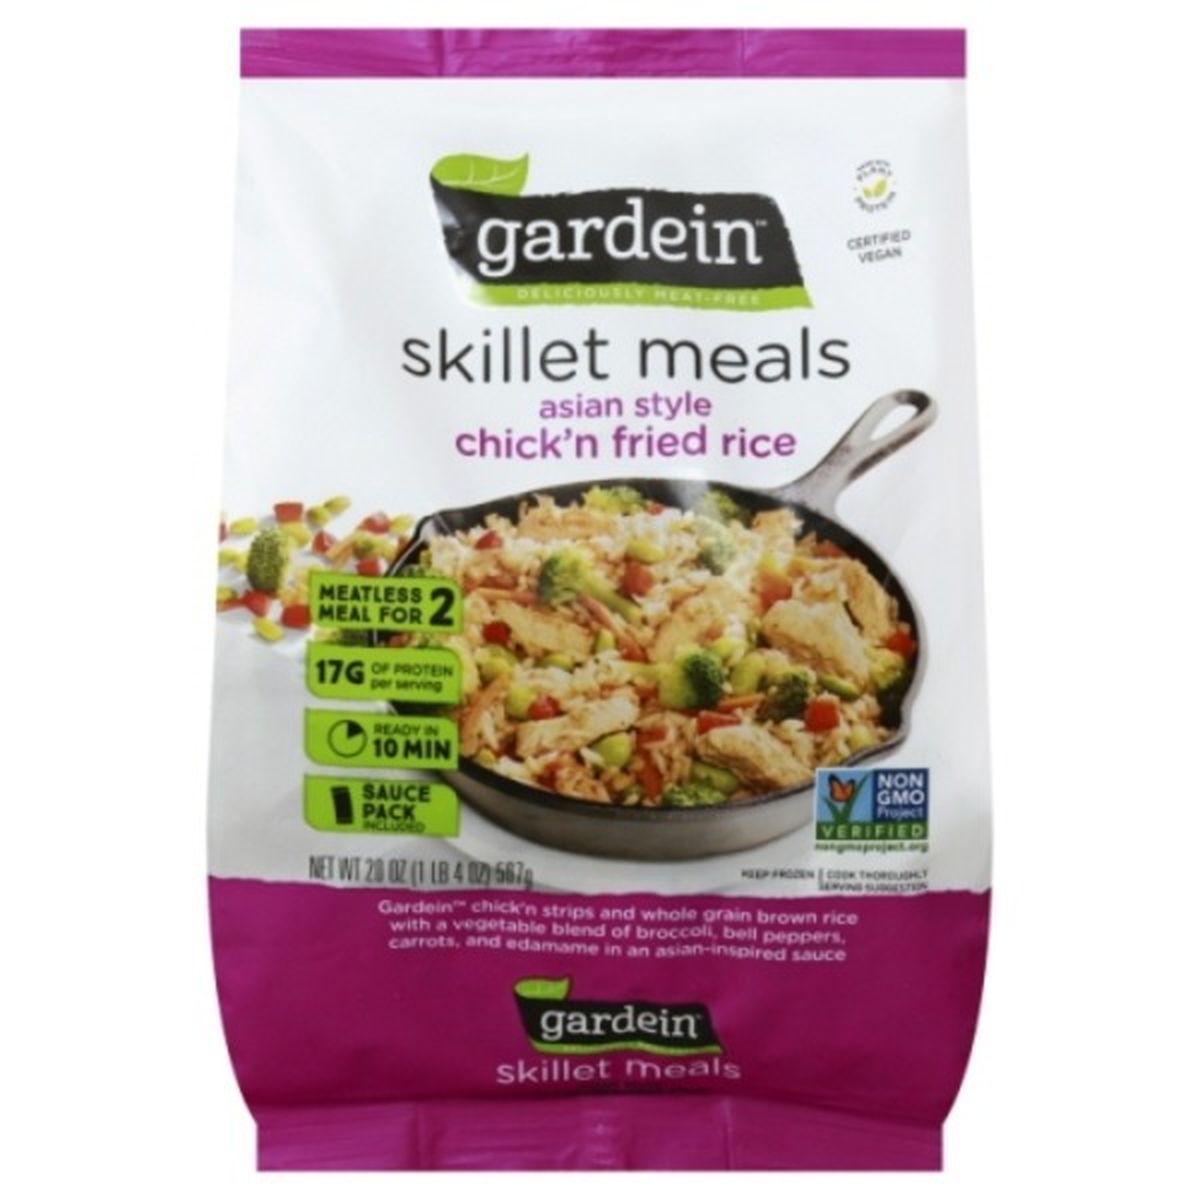 Calories in gardein Skillet Meals, Chick'n Fried Rice, Asian Style